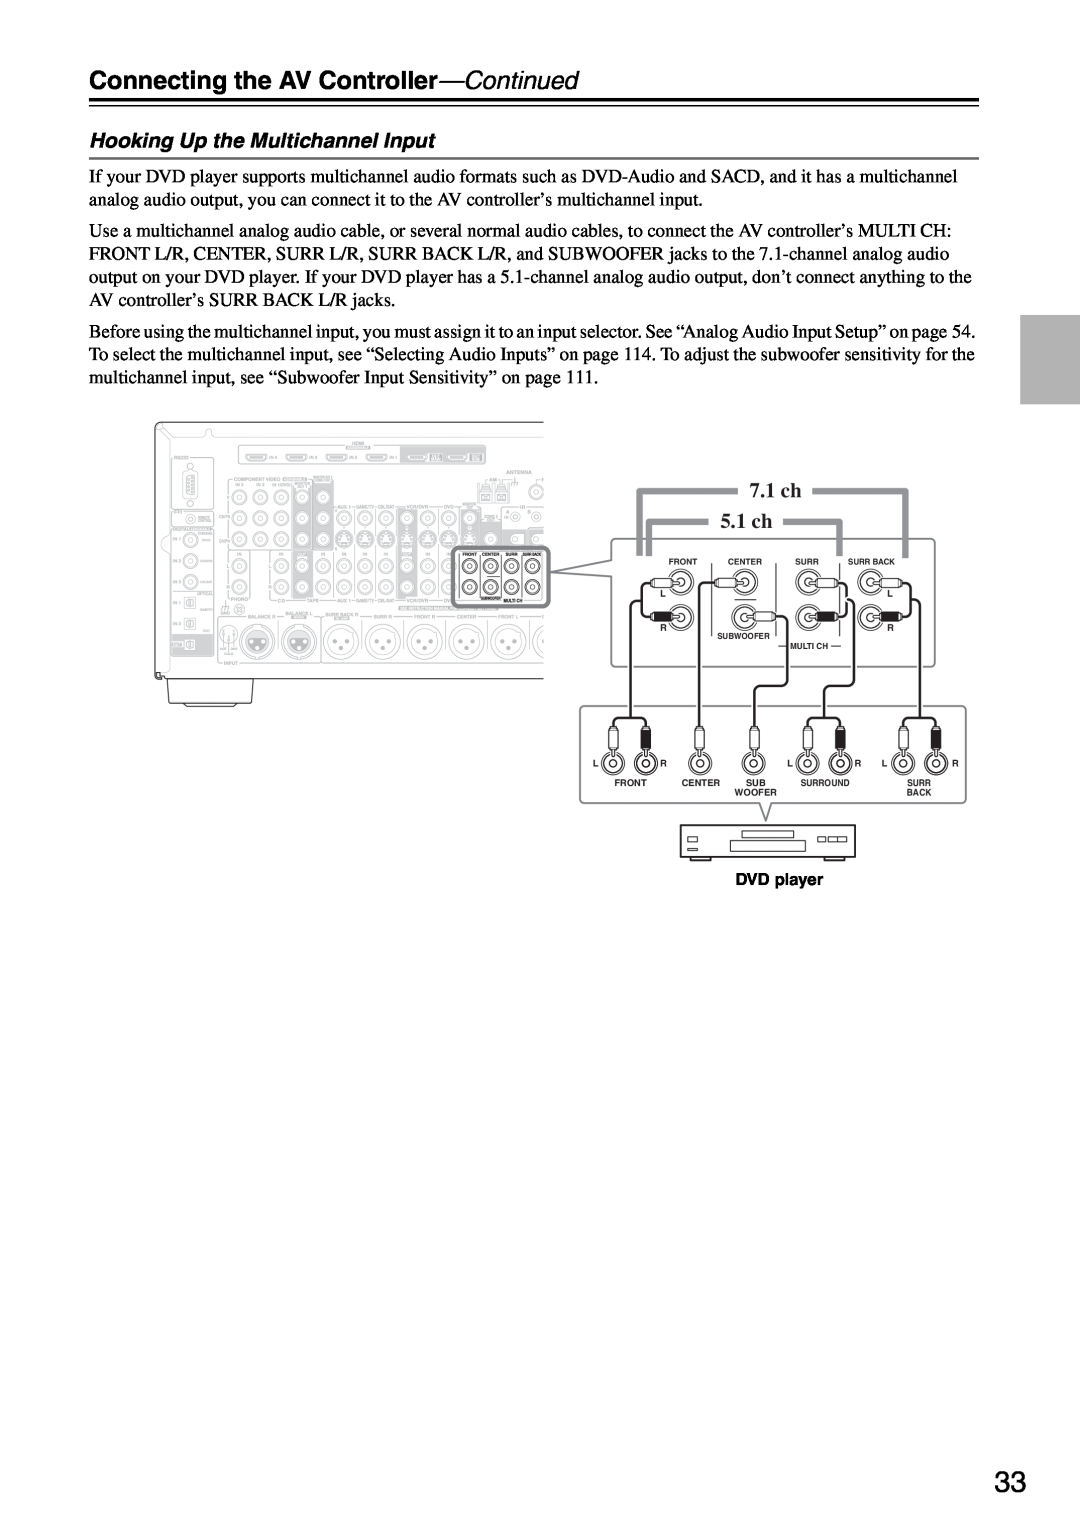 Onkyo PR-SC886 instruction manual Hooking Up the Multichannel Input, 7.1ch 5.1ch, Connecting the AV Controller—Continued 